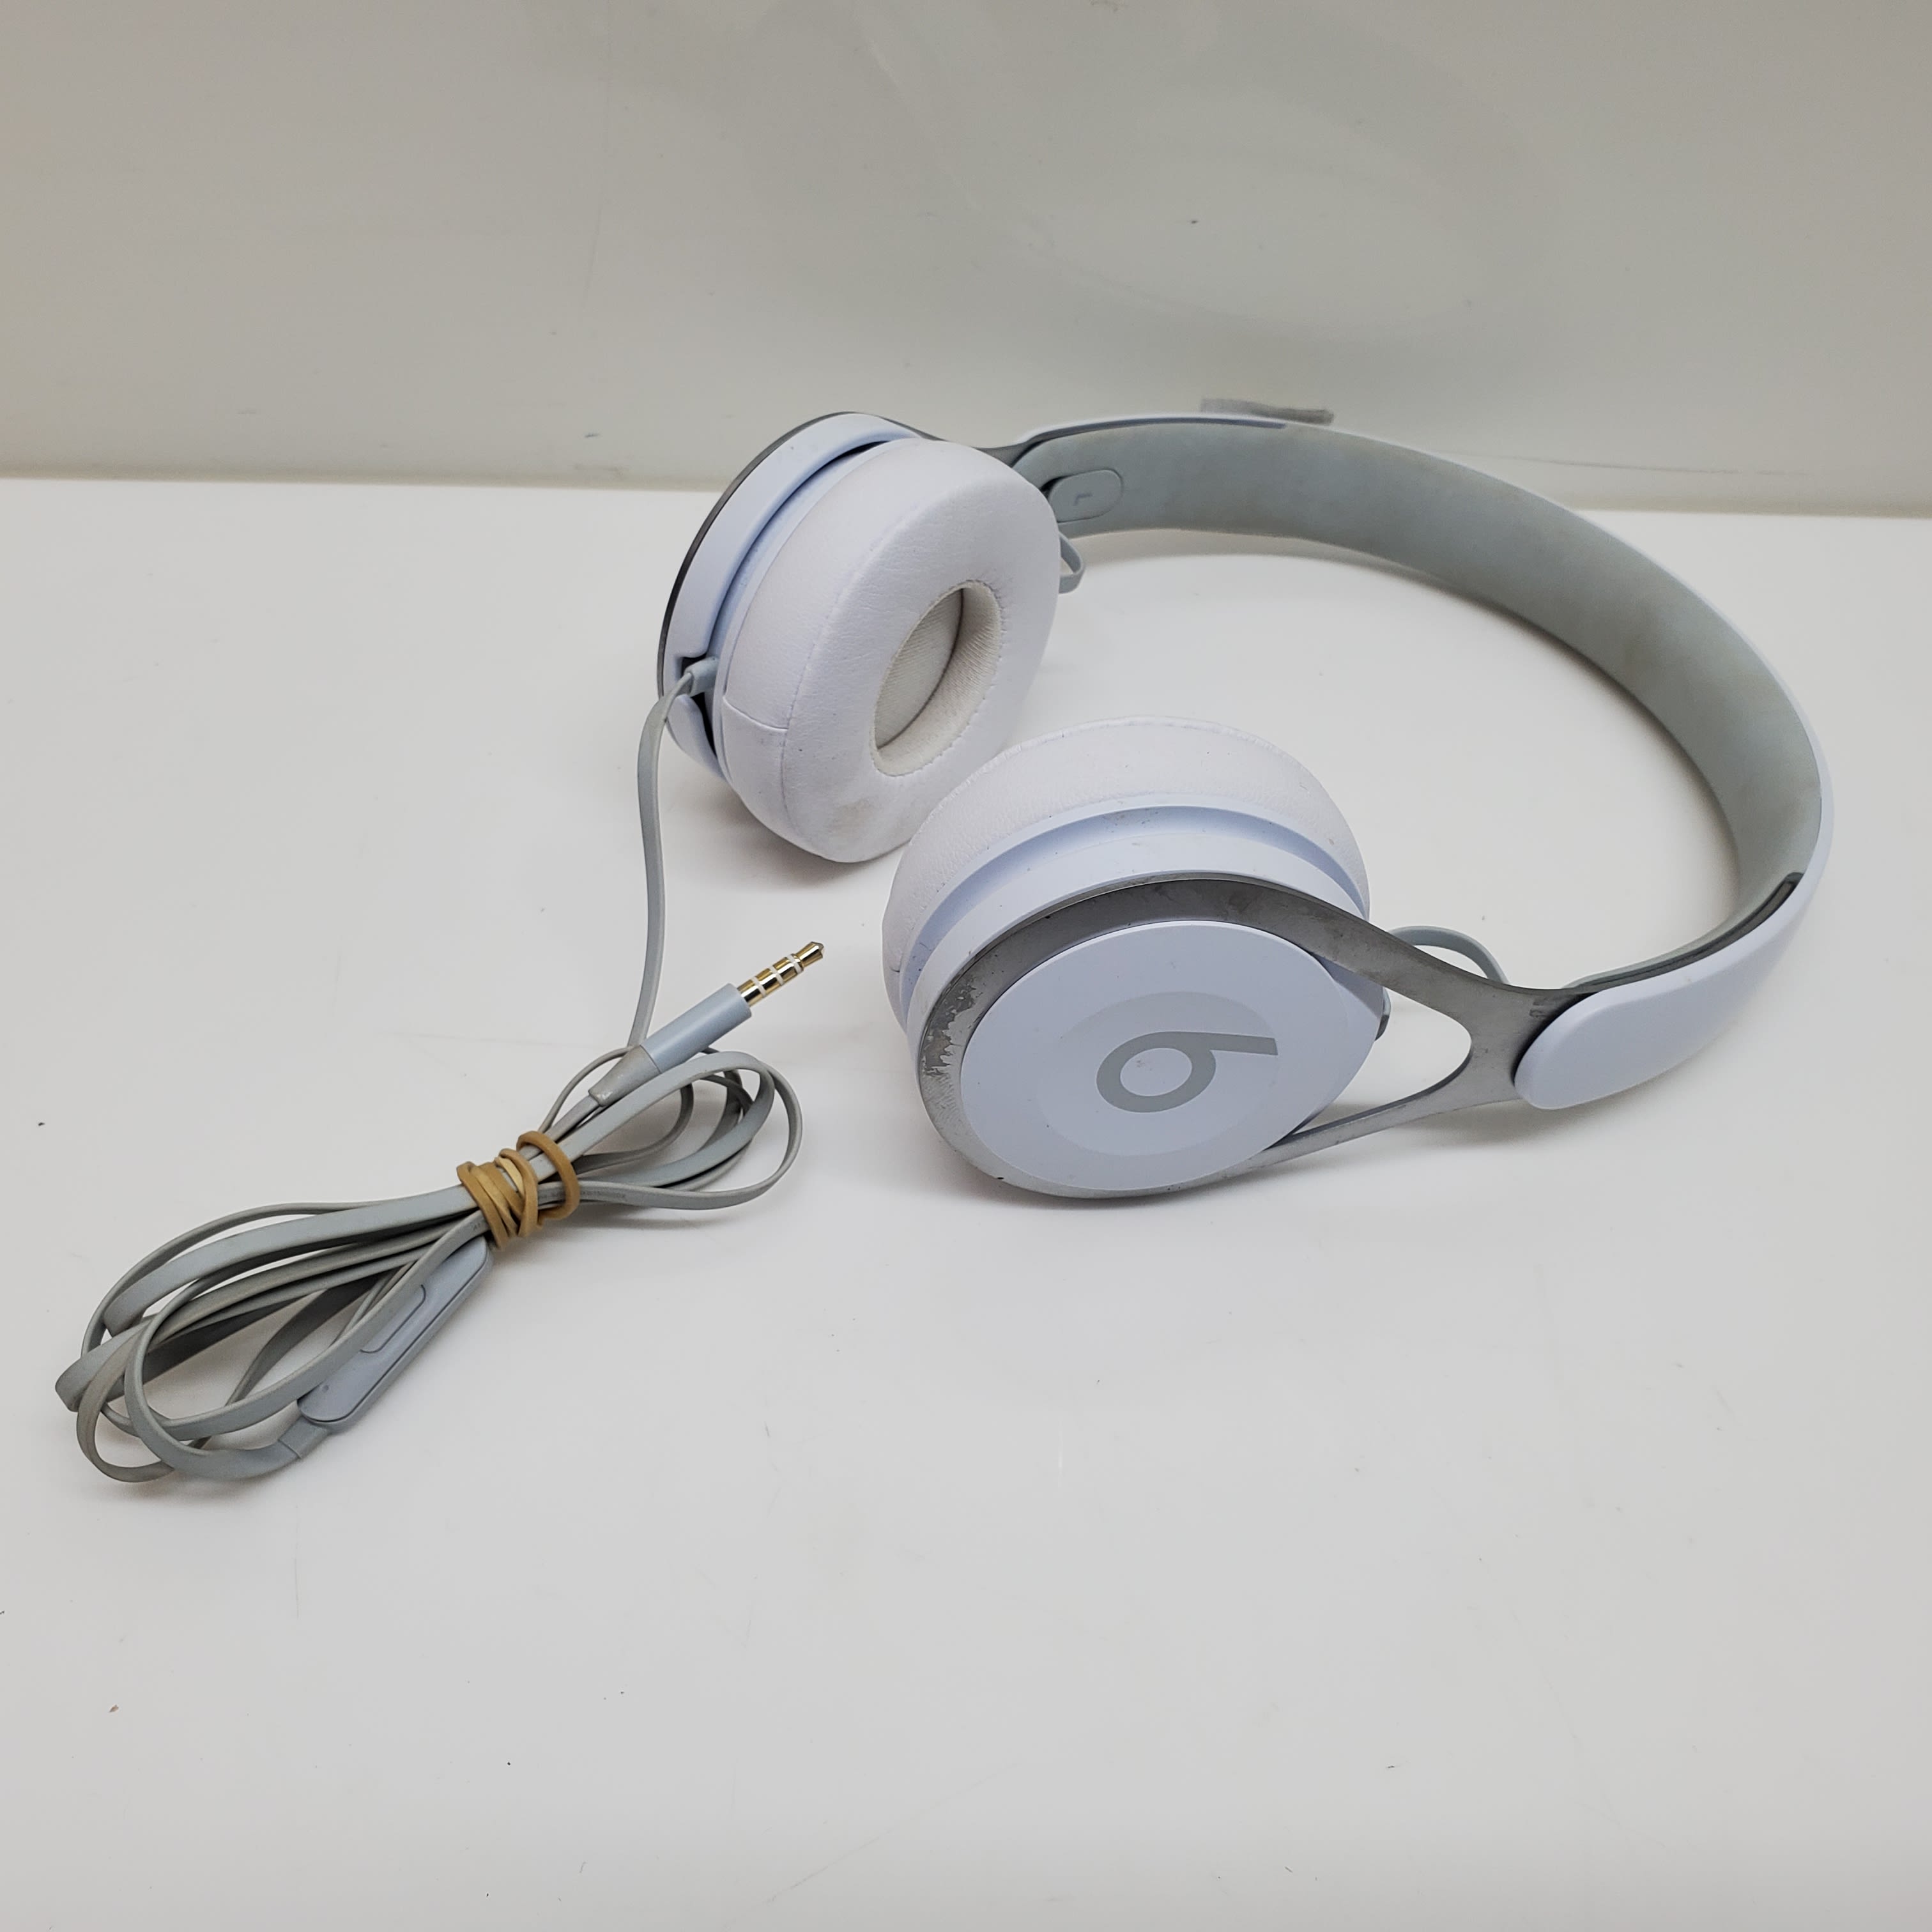 Buy the VTG. Beats By Dr. Dre Headphones Wired White Over The Ear